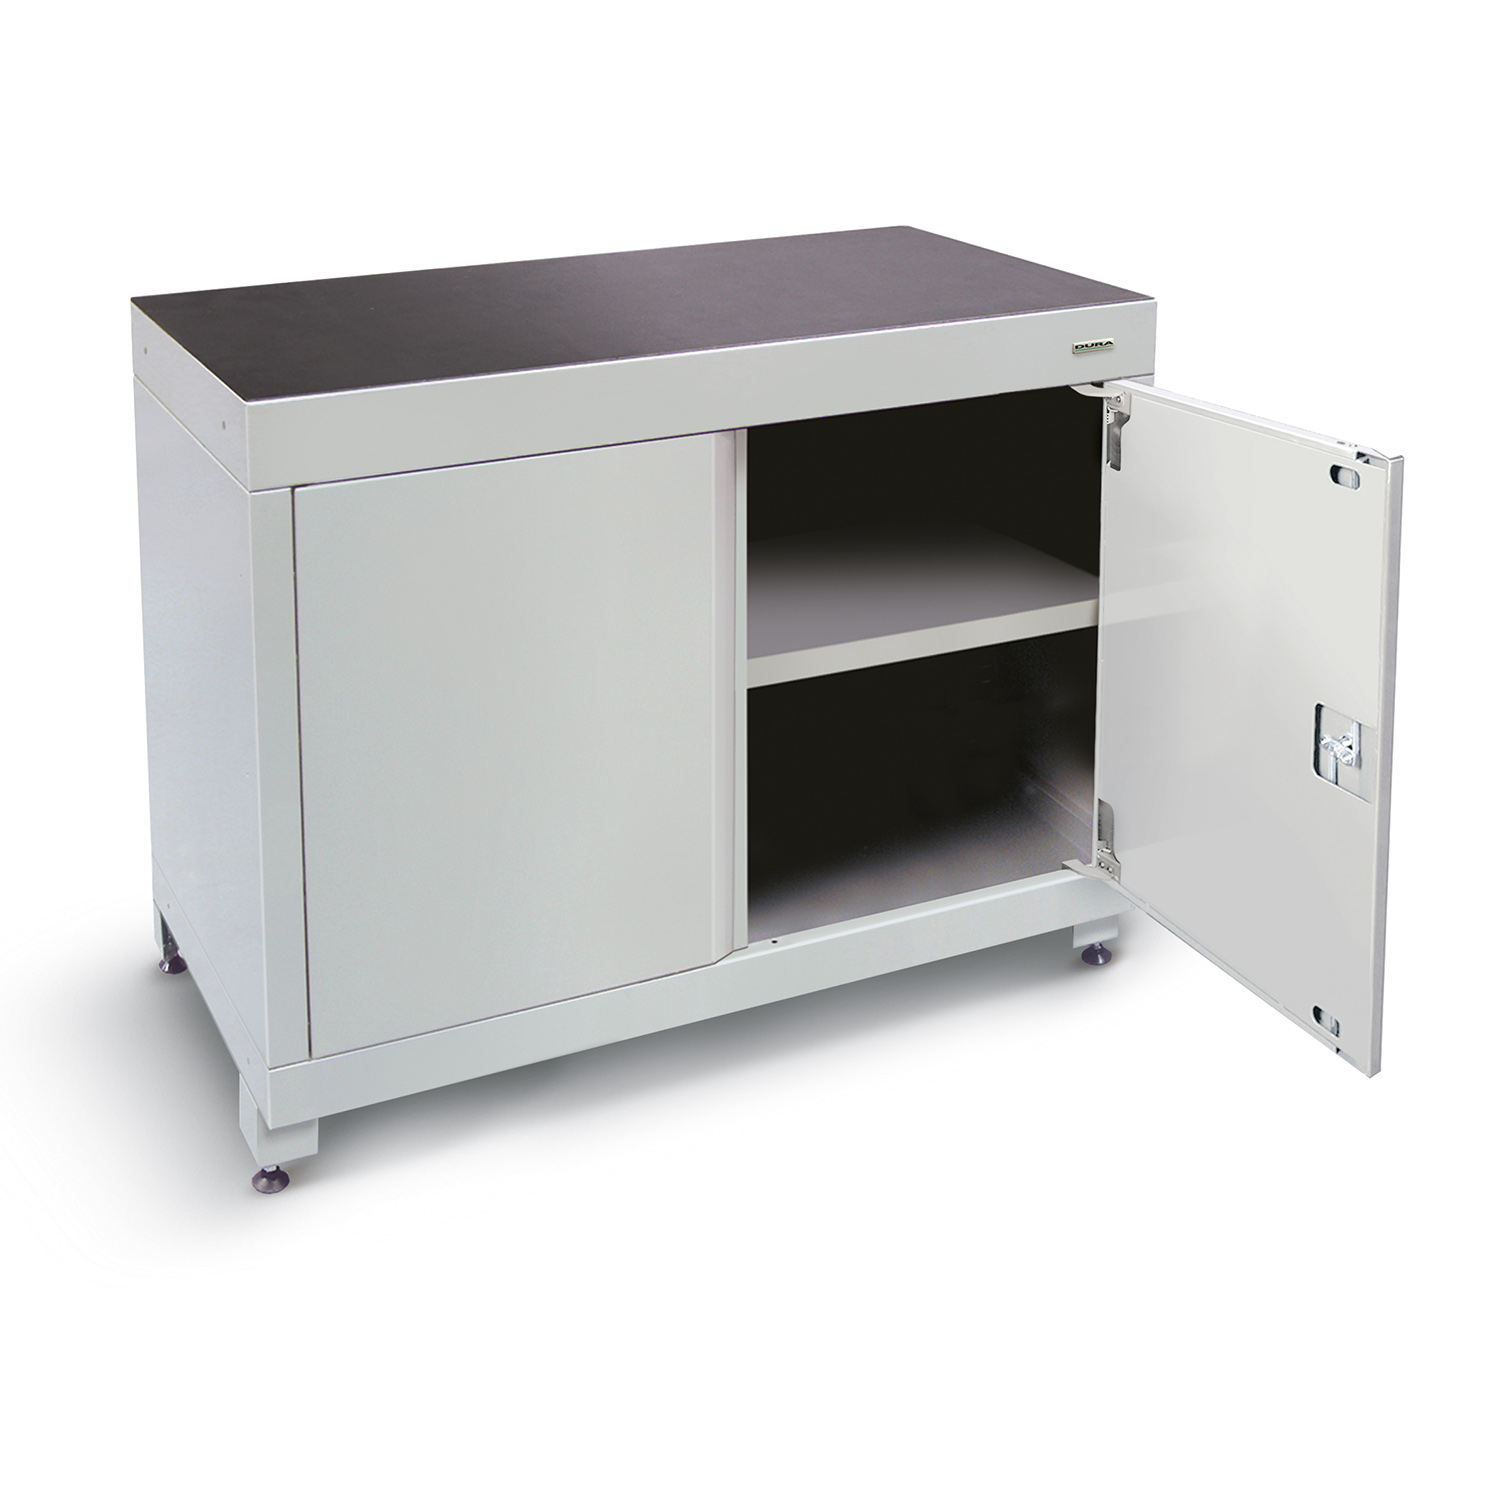 1200mm wide base cabinet (double hinged doors/feet)